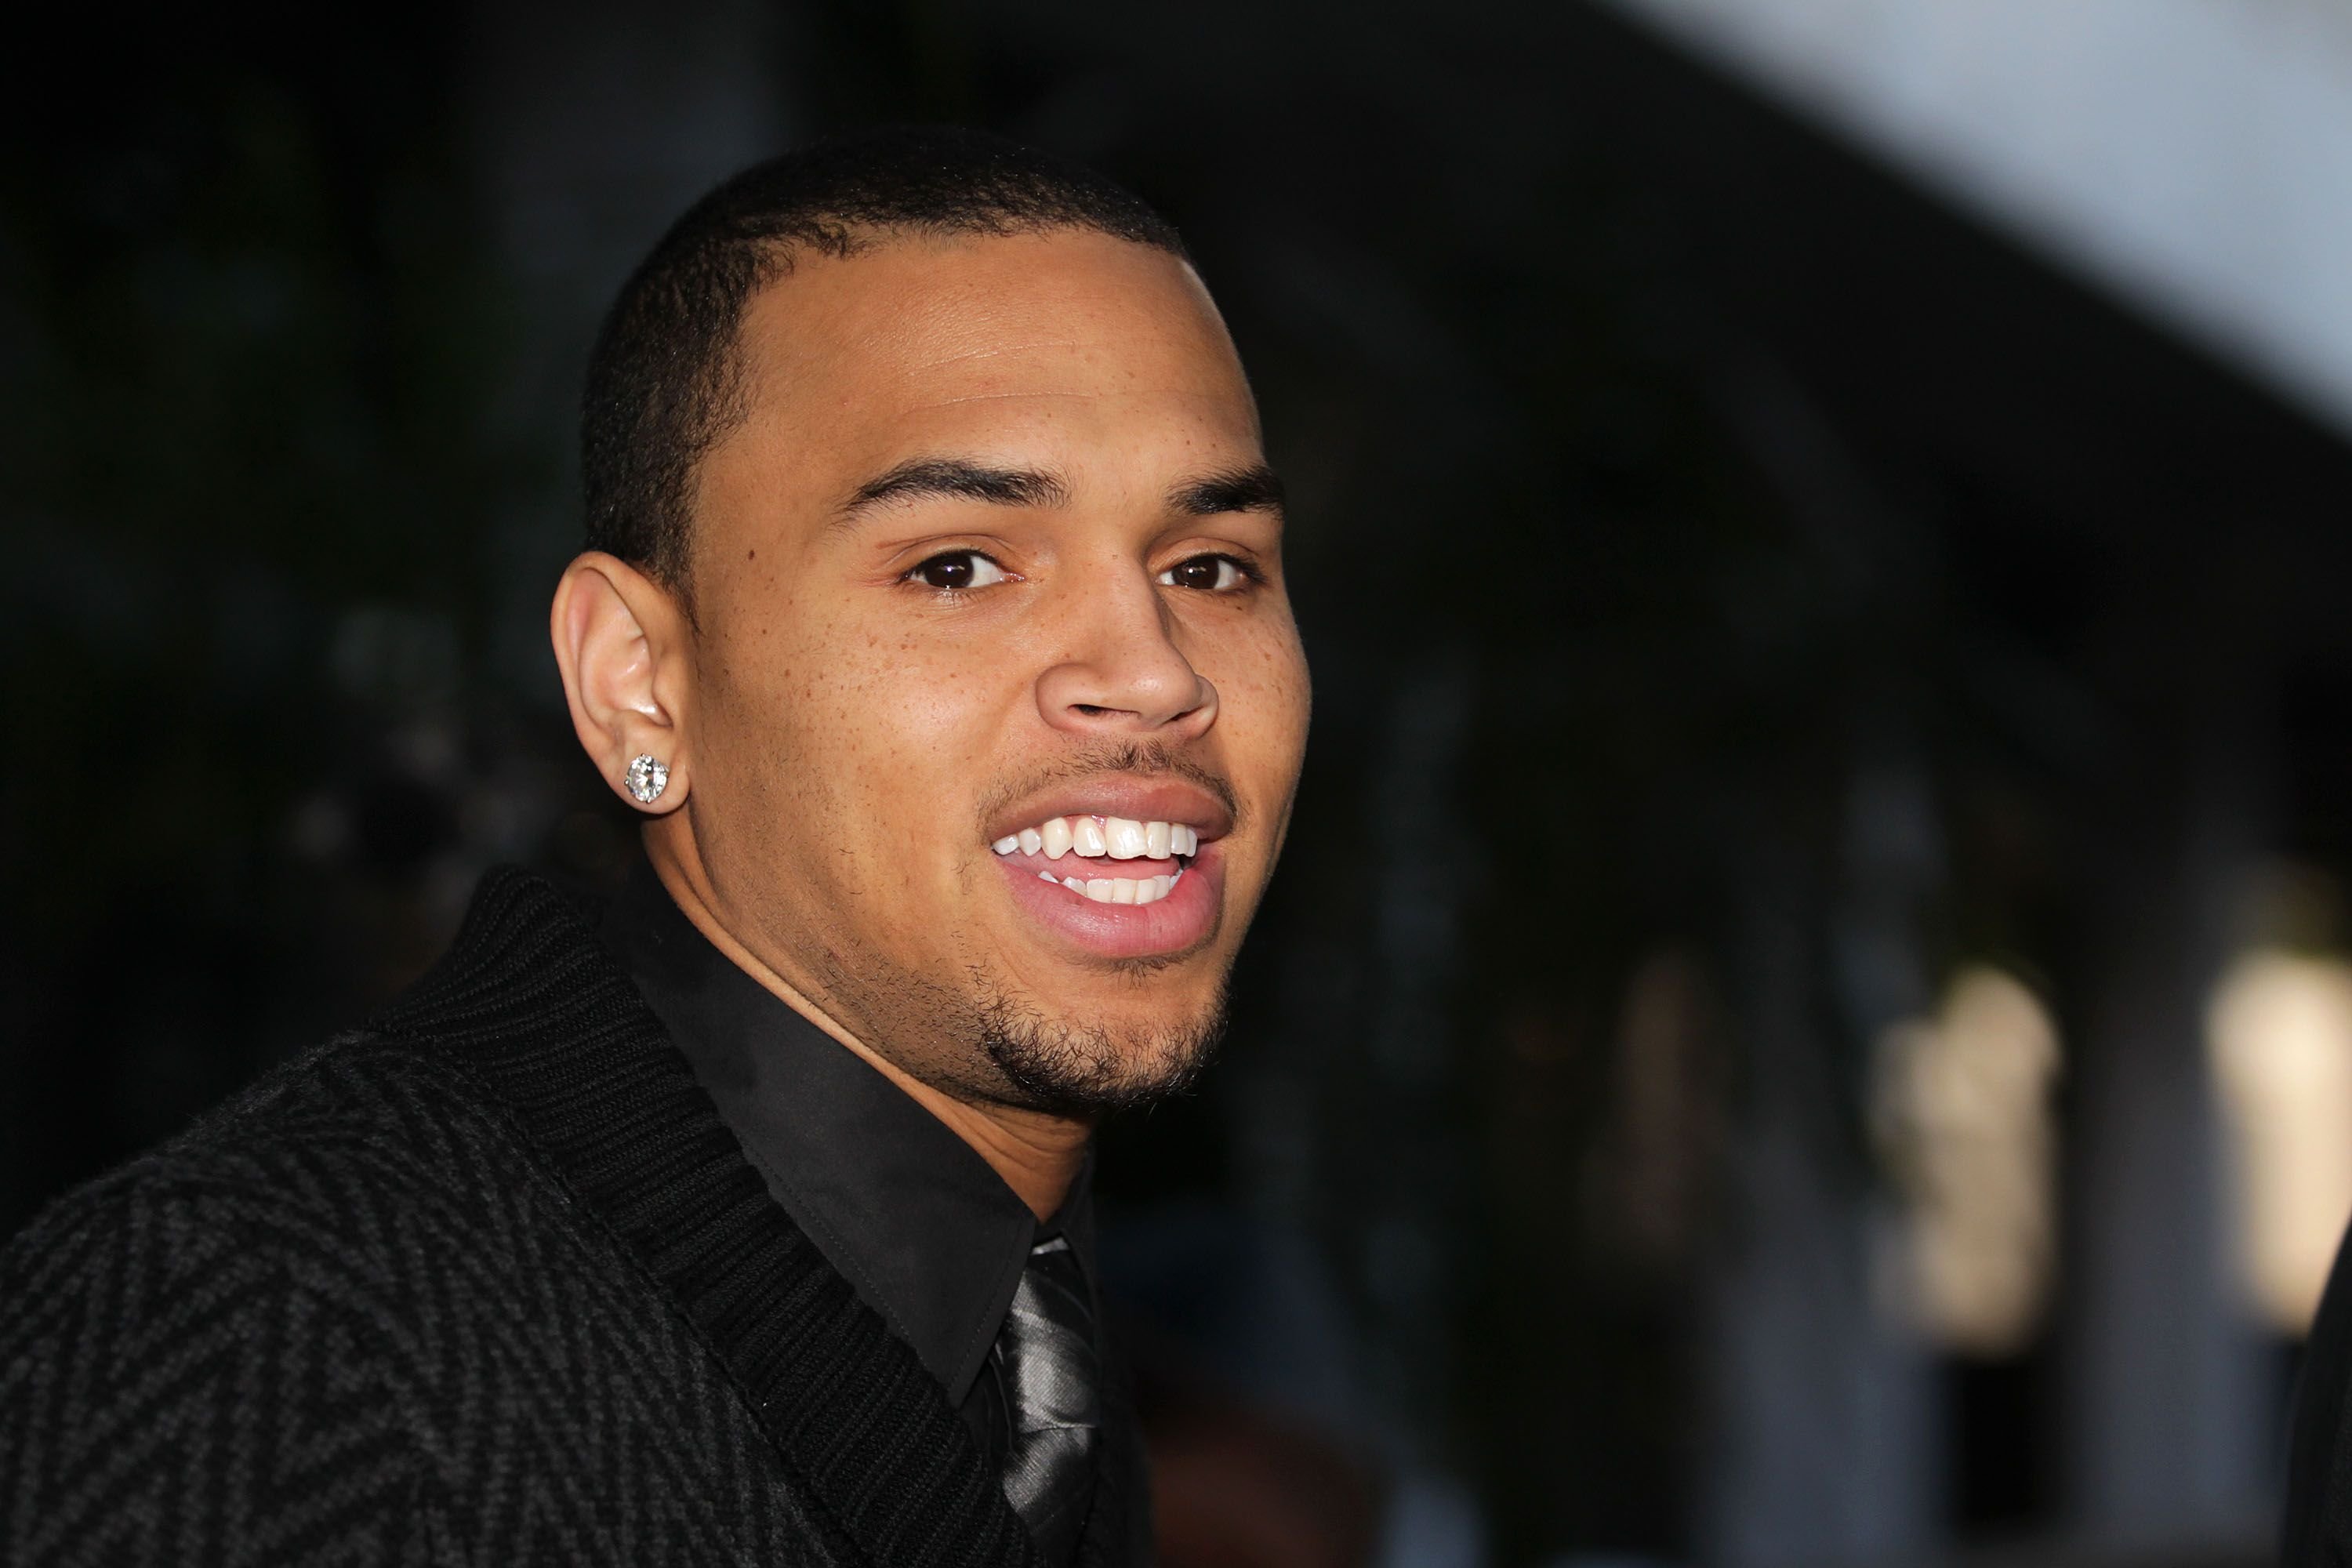 Chris Brown at the Los Angeles courthouse after a probation hearing in January 2011 | Source: Getty Images